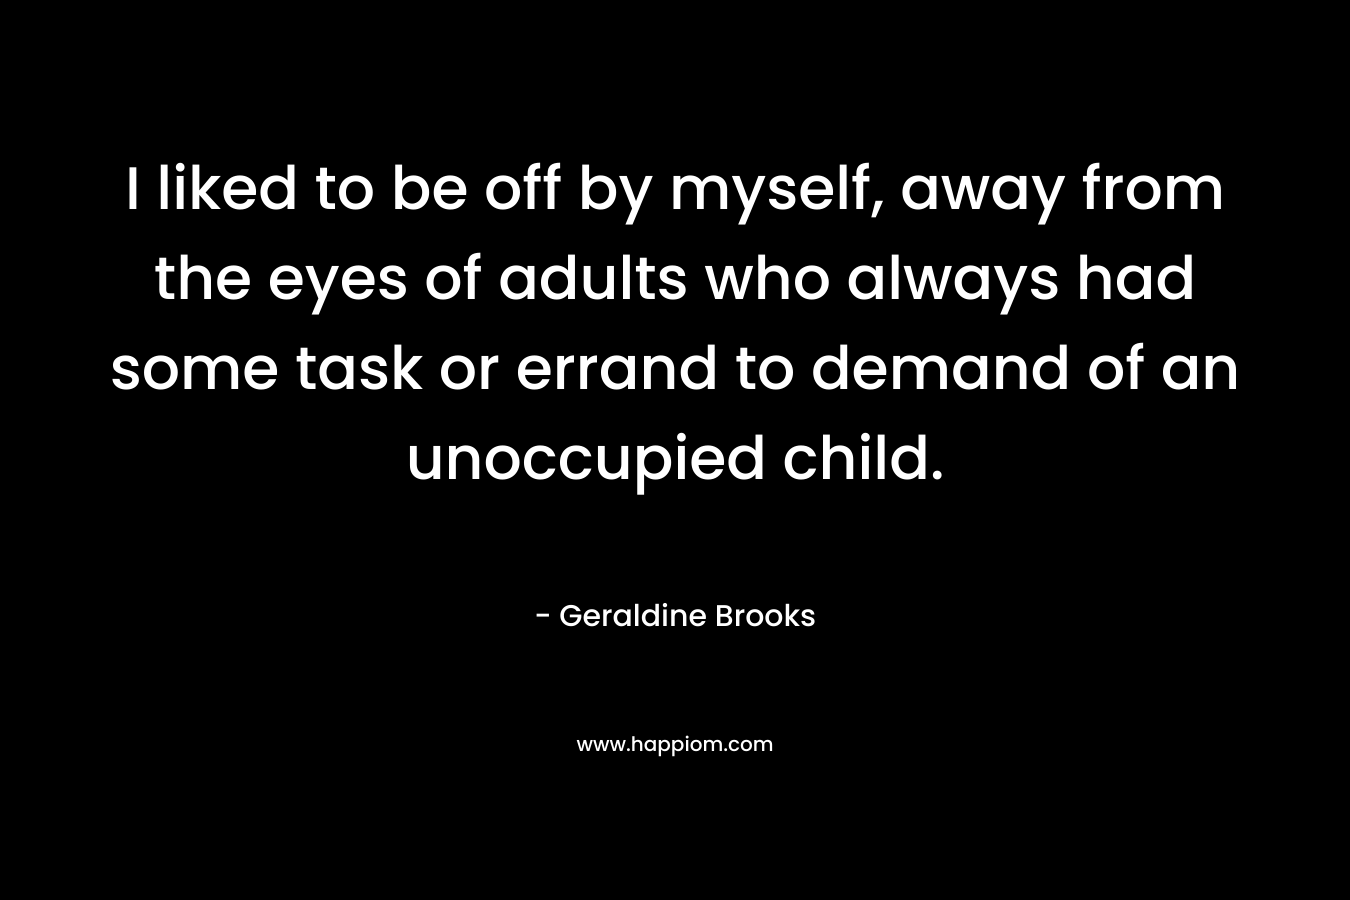 I liked to be off by myself, away from the eyes of adults who always had some task or errand to demand of an unoccupied child.